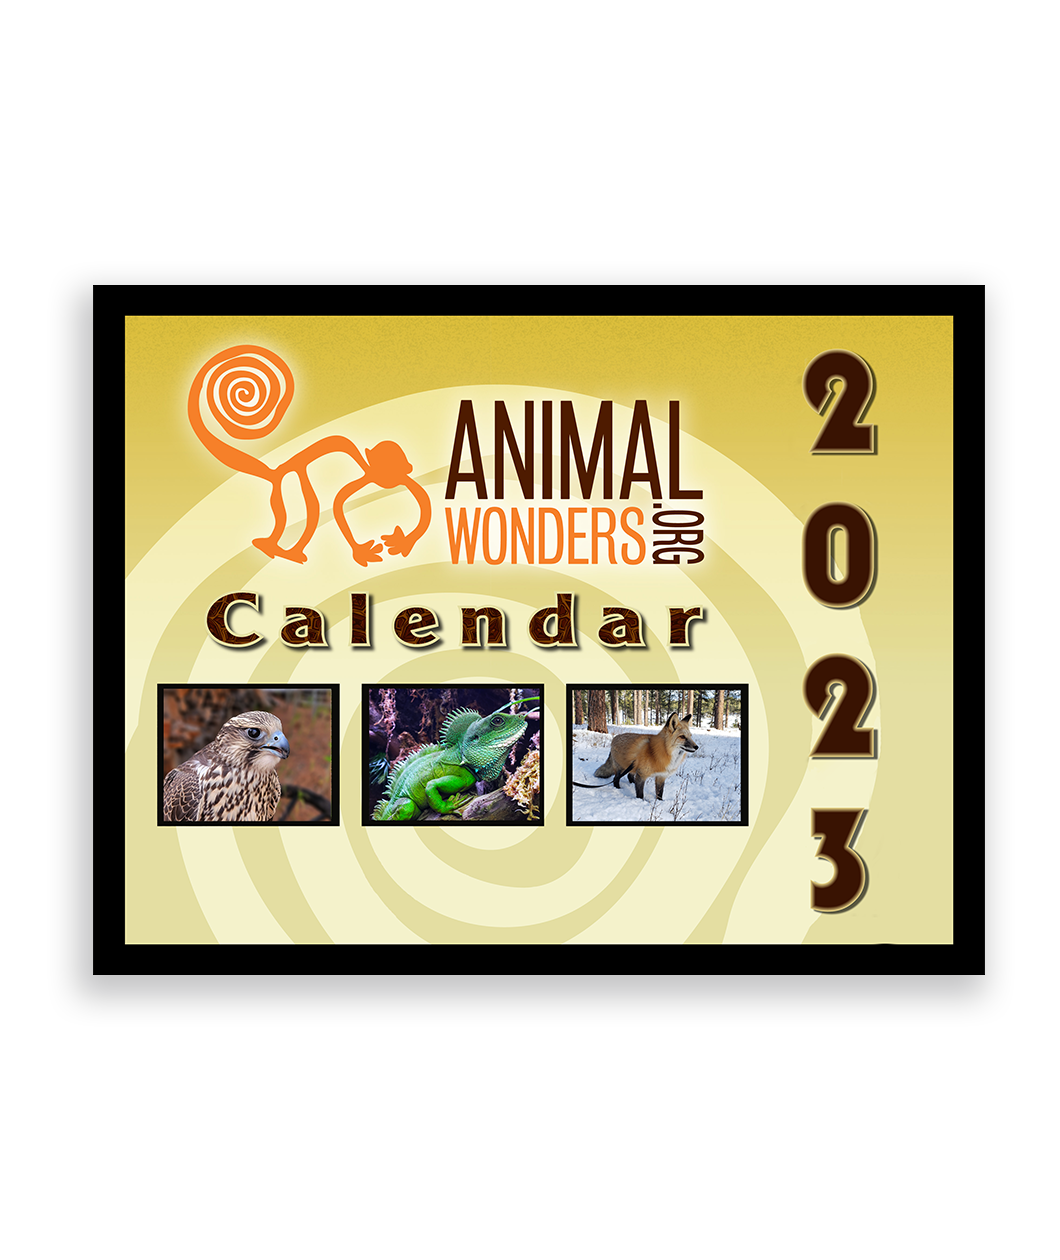 The cover of the Animal Wonders 2023 Calendar is a light yellow color with a swirl in the background. It features three small photos of a bird, iguana and fox under the Animal Wonders logo. 